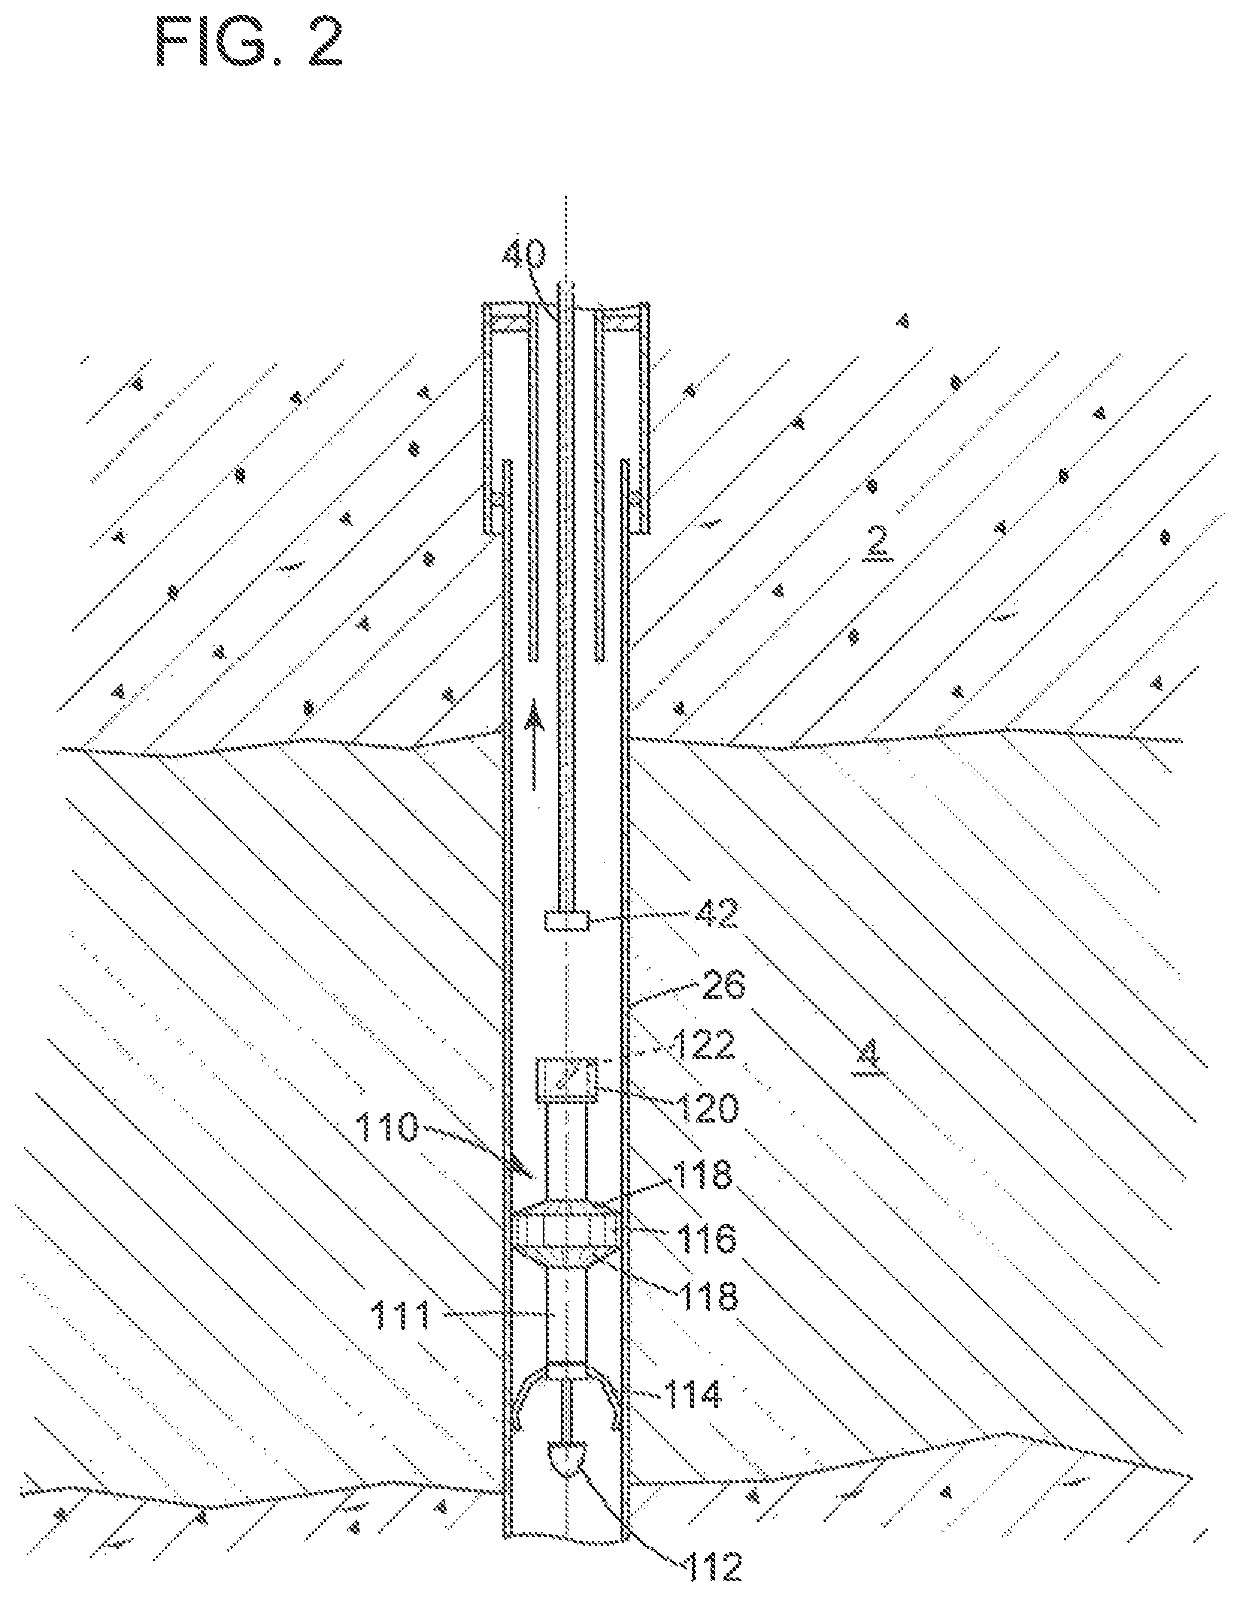 Apparatus and method employing retrievable landing base with guide for same location multiple perforating gun firings